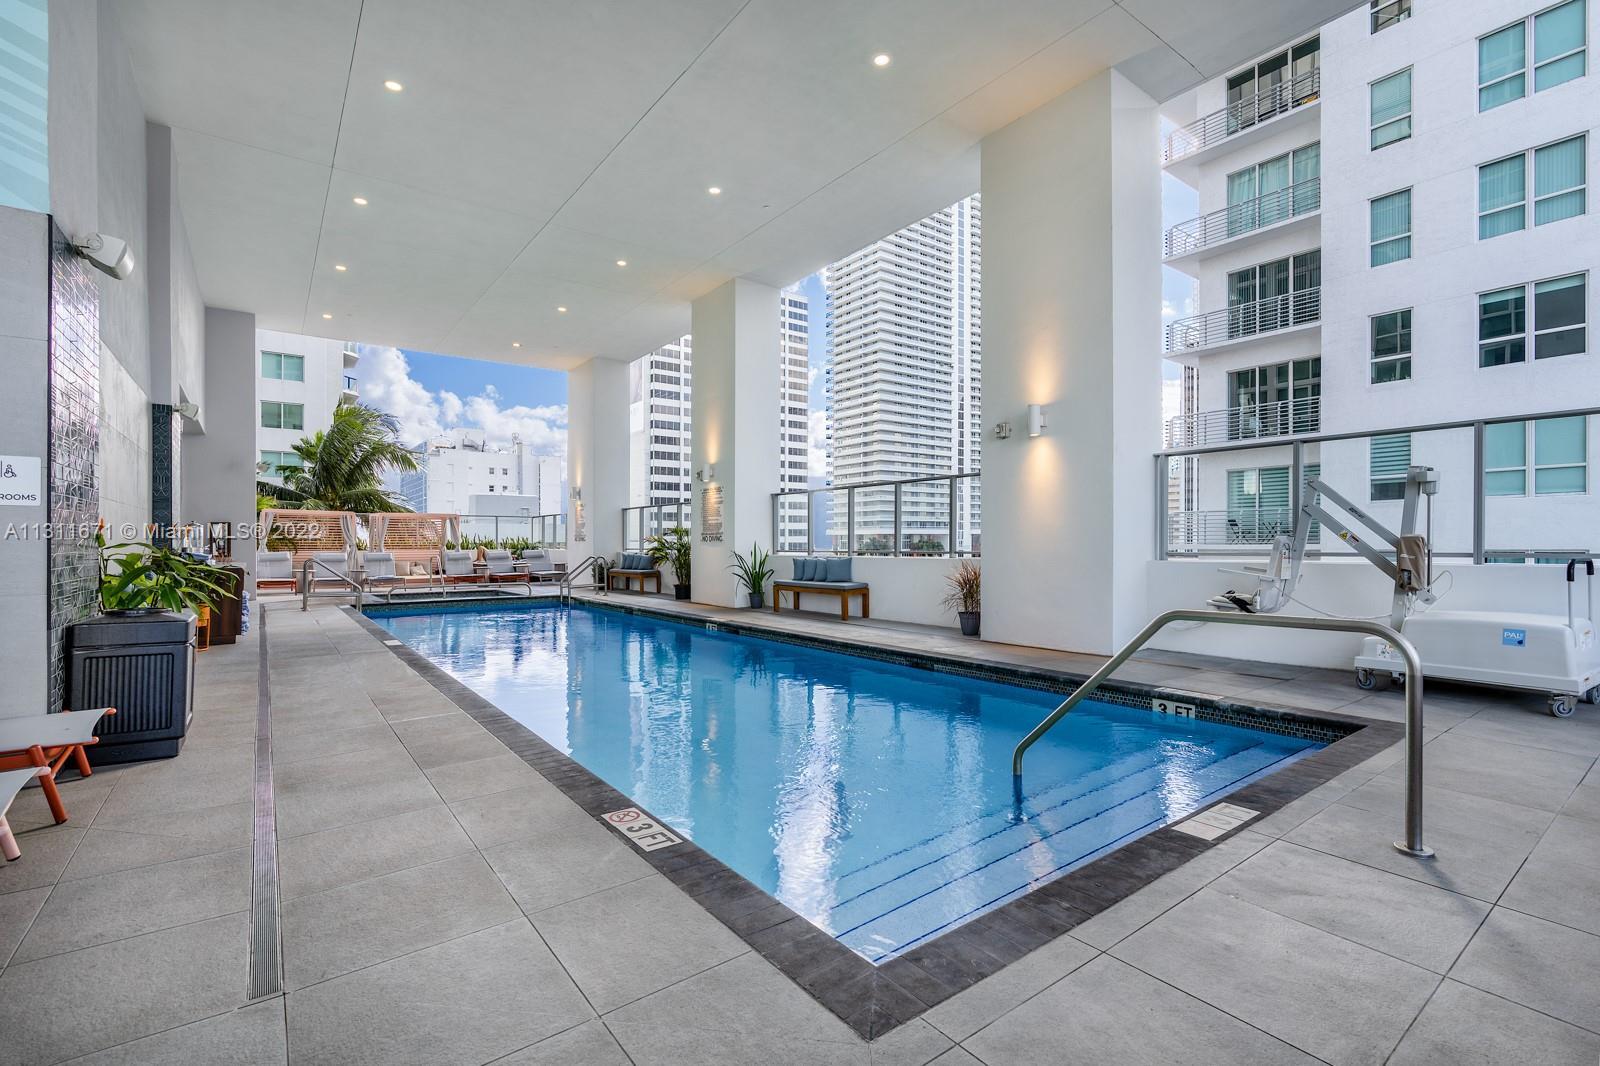 Welcome to a spacious 1-bedroom 1-bathroom condo in AIRBNB approved YotelPad in Downtown Miami. Owne